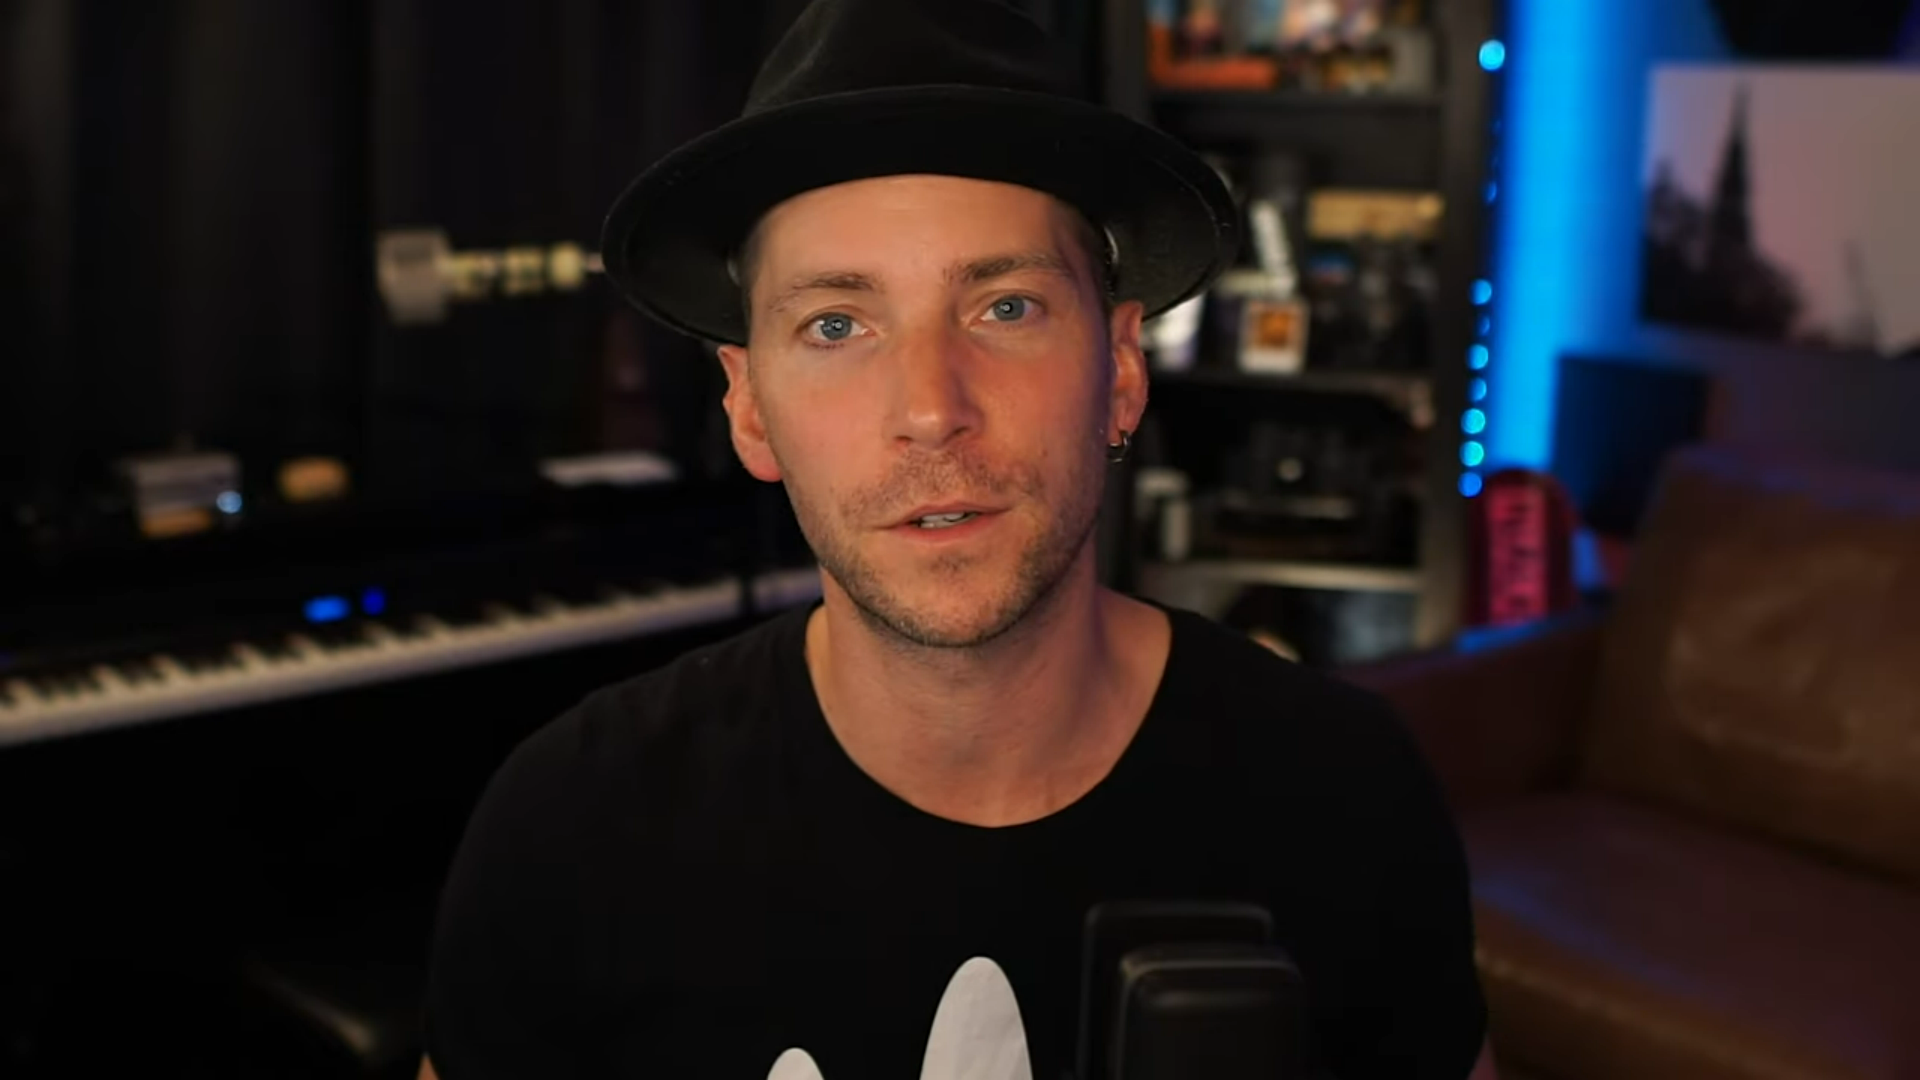 Watch Troy Baker show off his voice acting skills – Destructoid